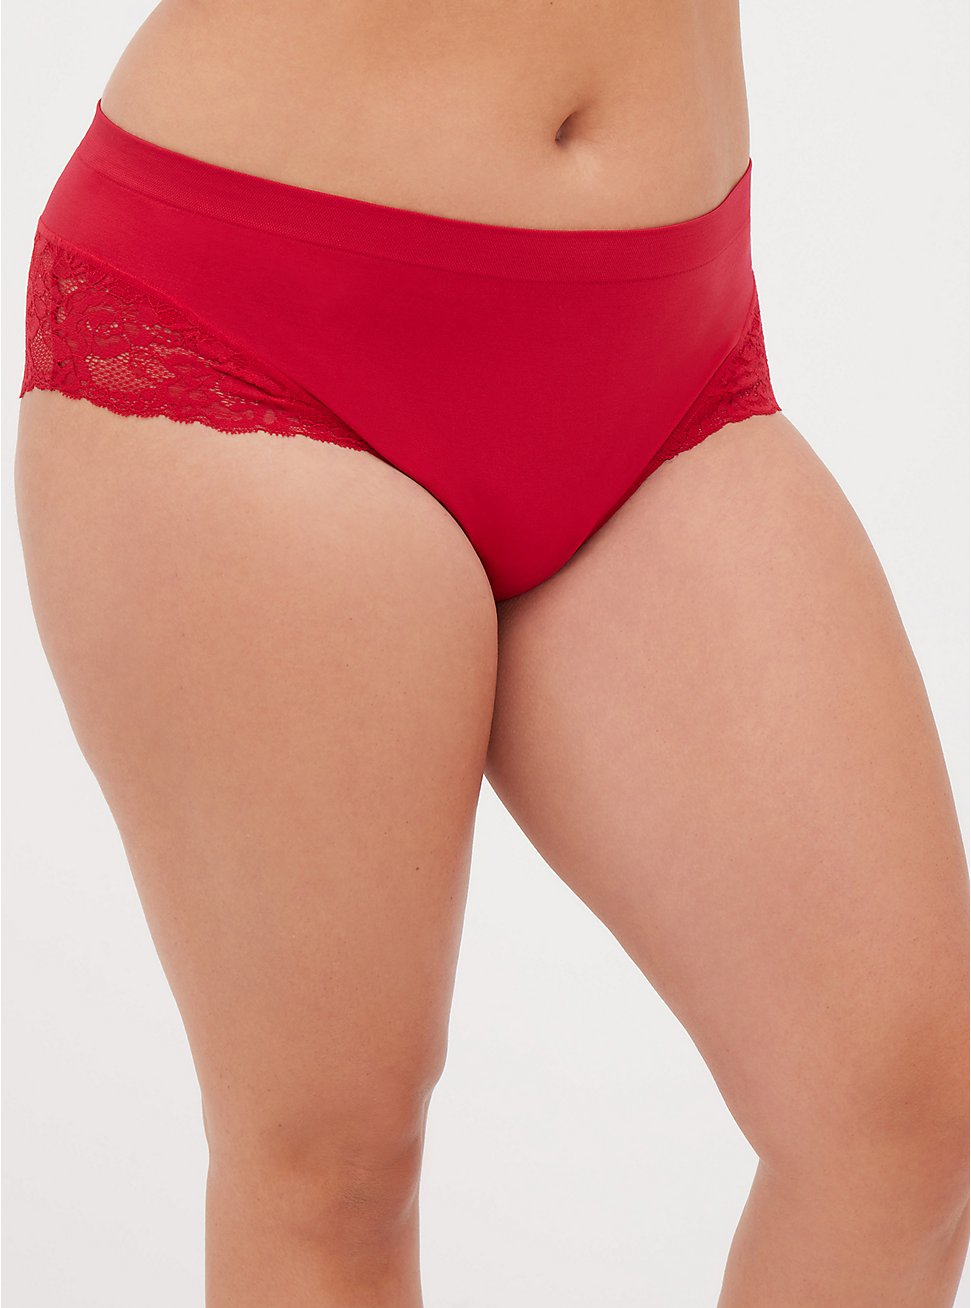 Seamless Flirt Cheeky Panty - Nylon Red, JESTER RED, hi-res